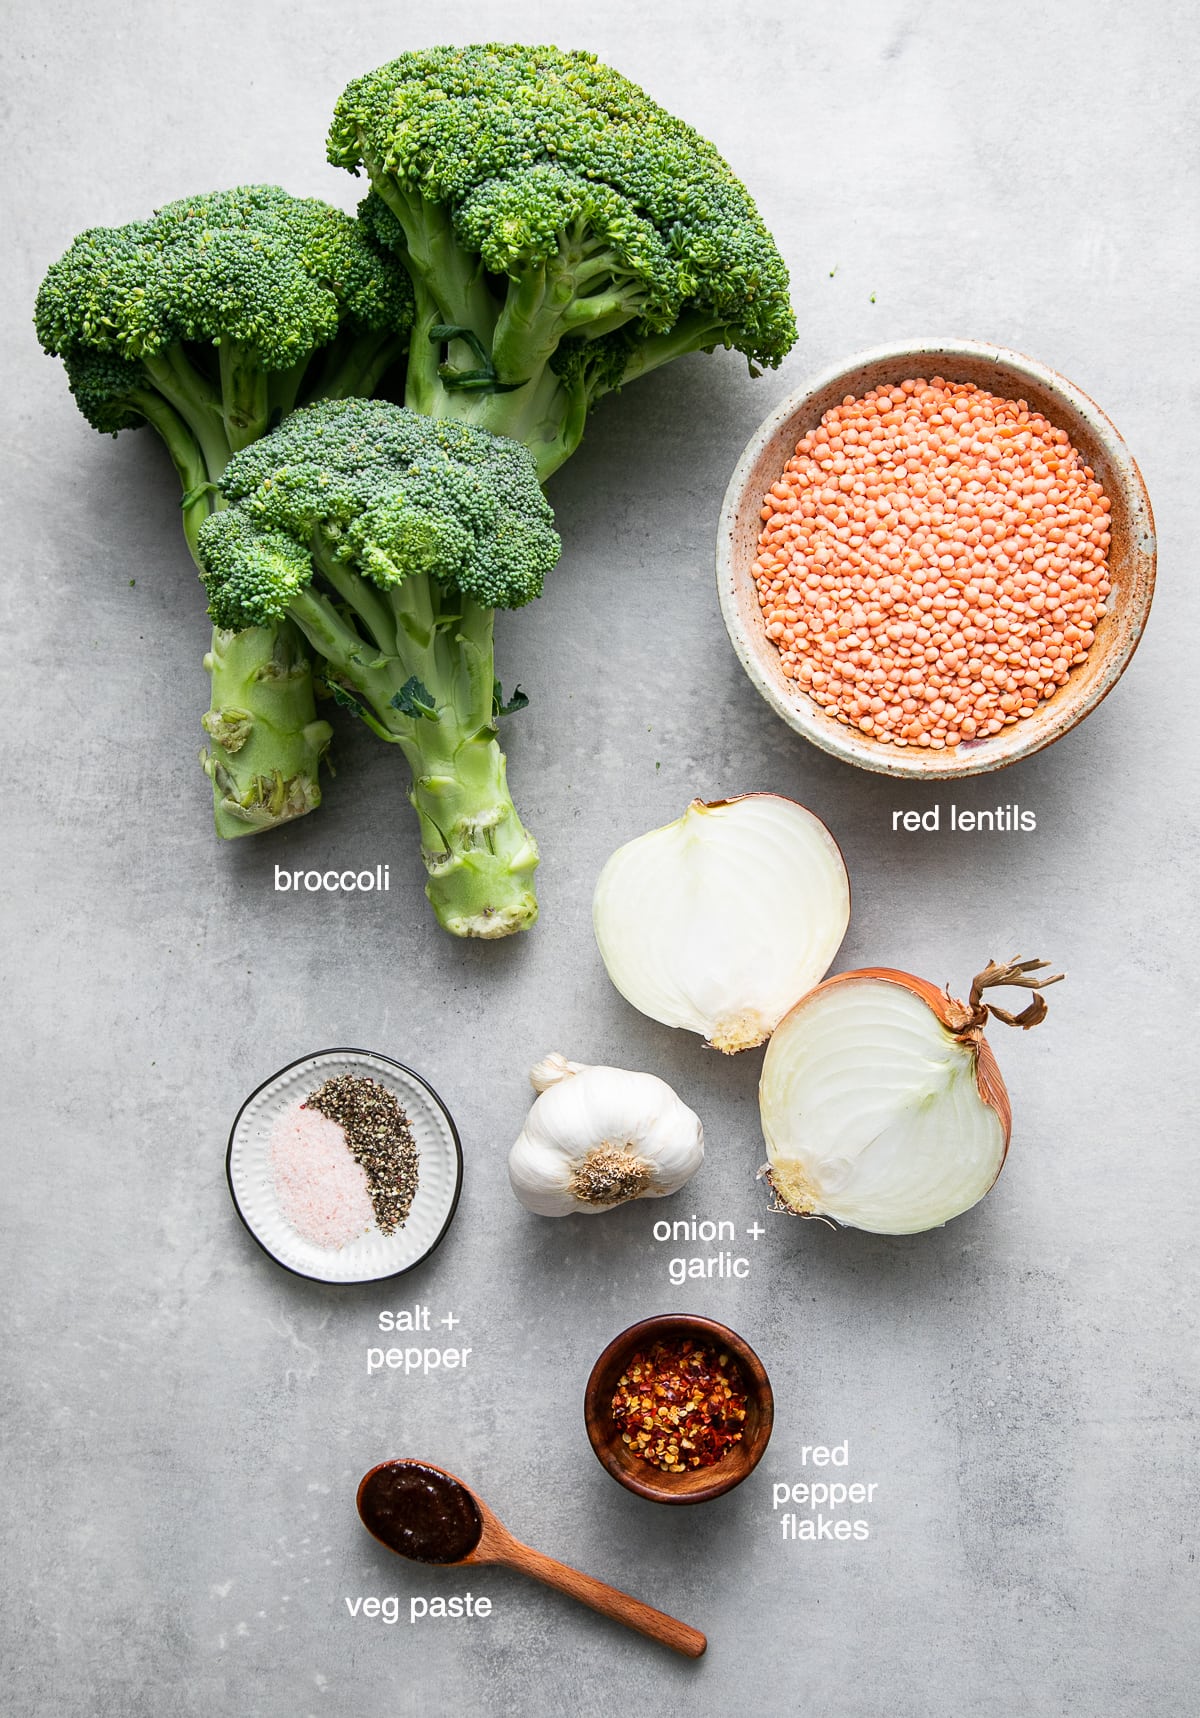 top down view of ingredients used to make creamy vegan broccoli red lentil soup recipe.